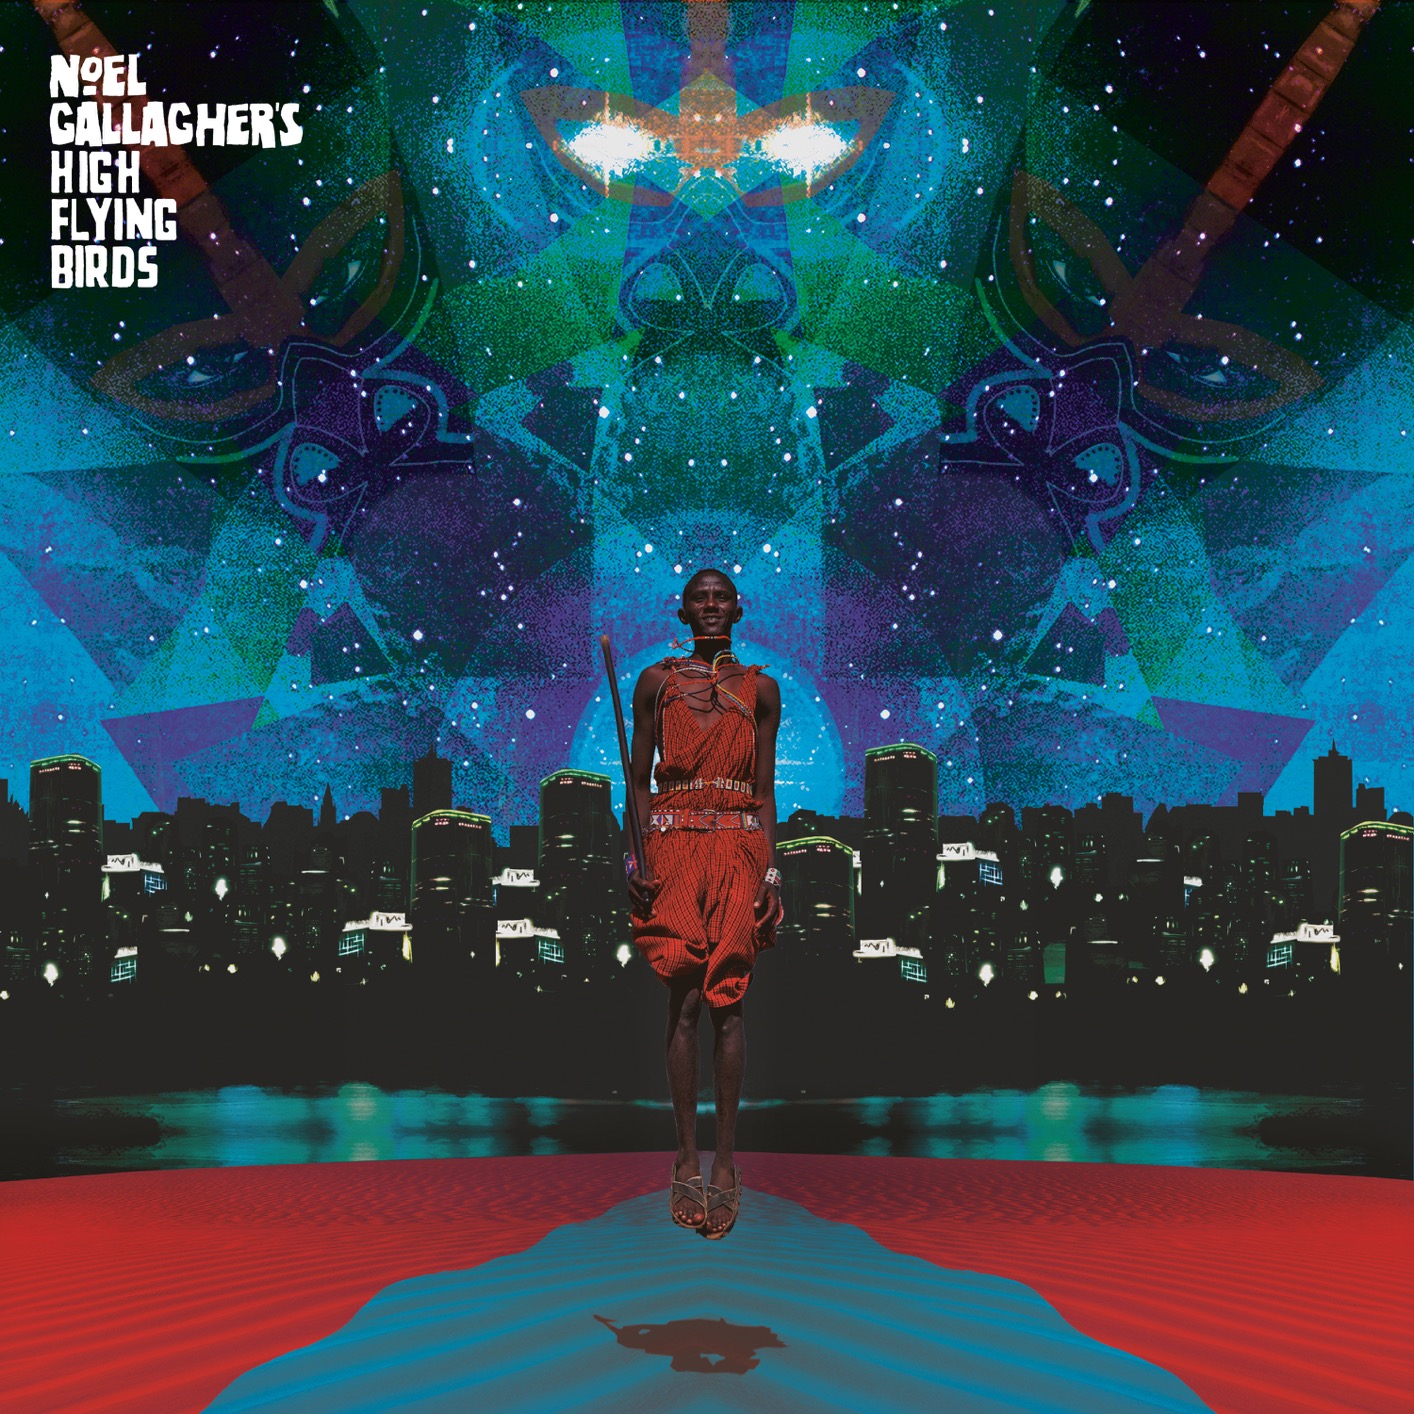 Noel Gallagher’s High Flying Birds - This Is The Place EP (2019) [FLAC 24bit/44,1kHz]